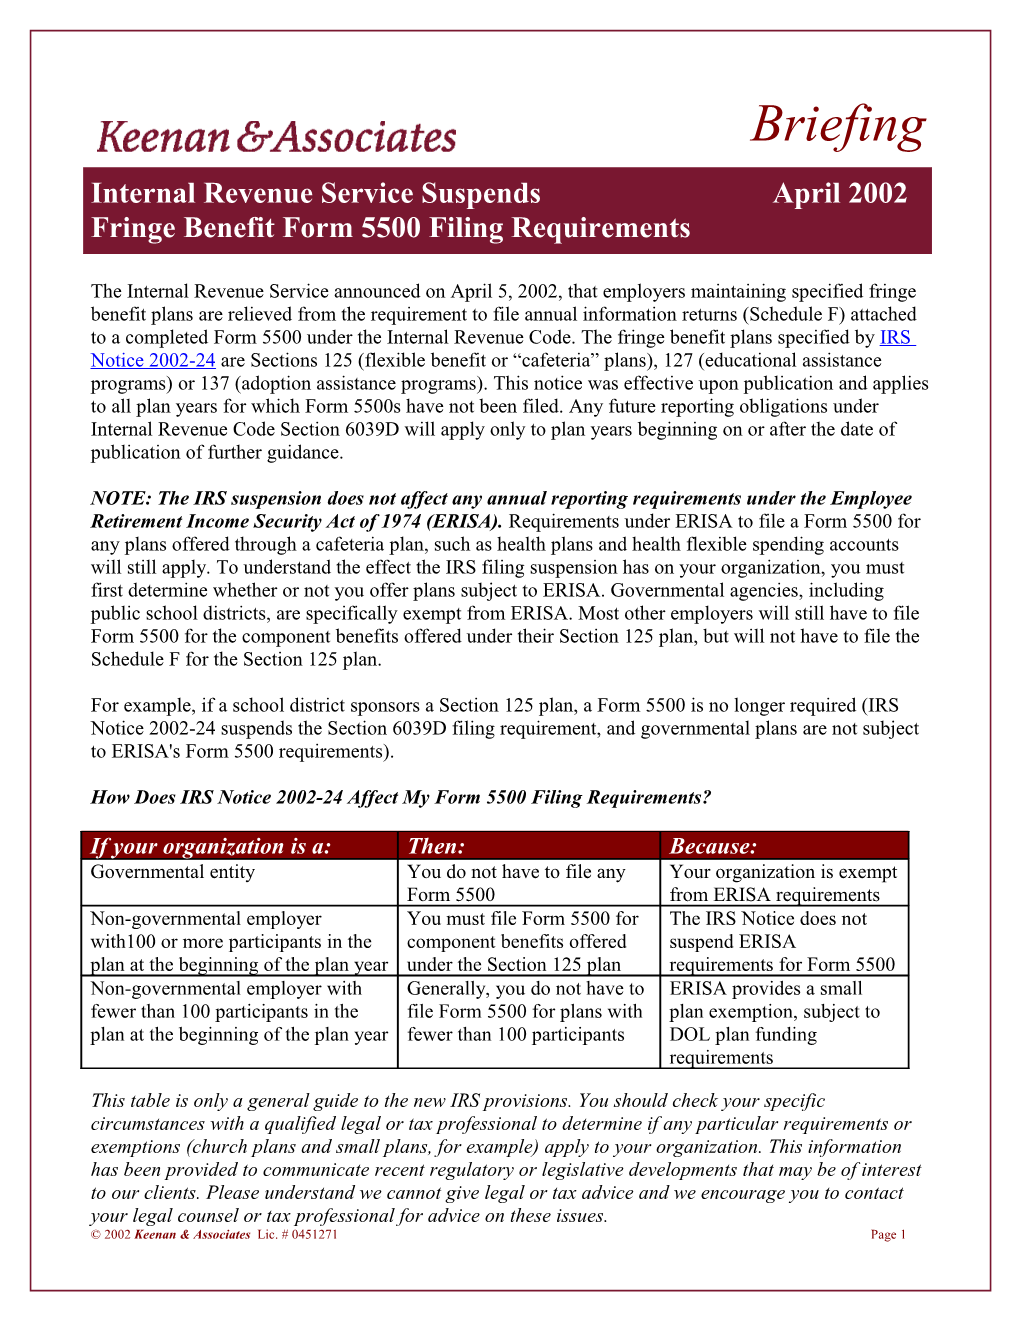 How Does IRS Notice 2002-24 Affect My Form 5500 Filing Requirements?